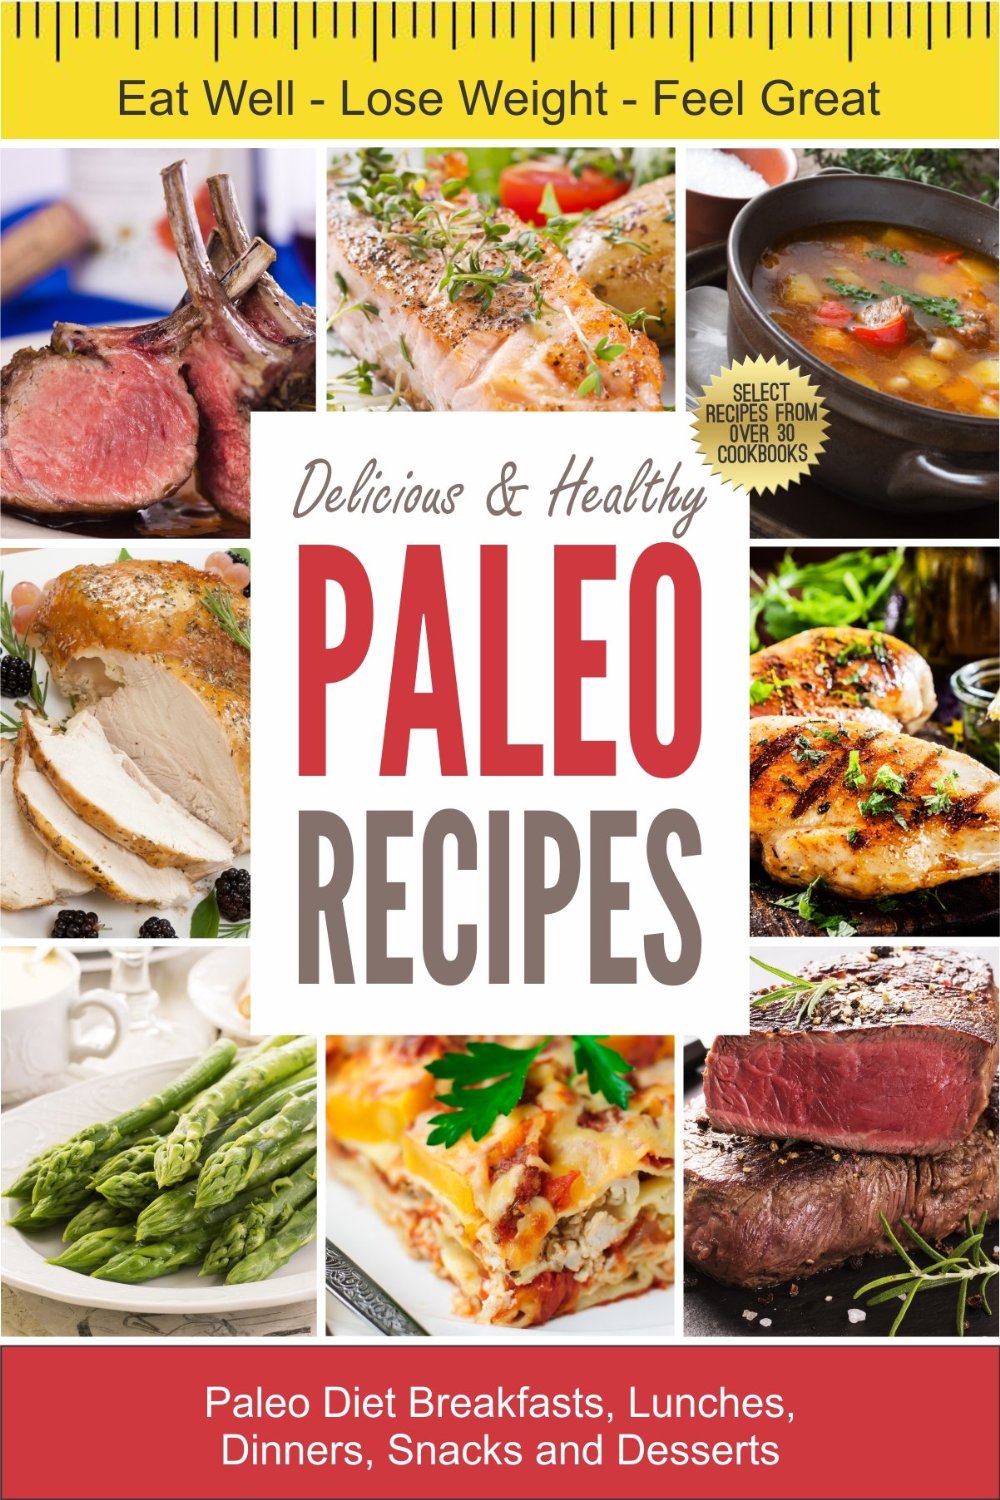 Healthy & Delicious Paleo Recipes by Jean LeGrand